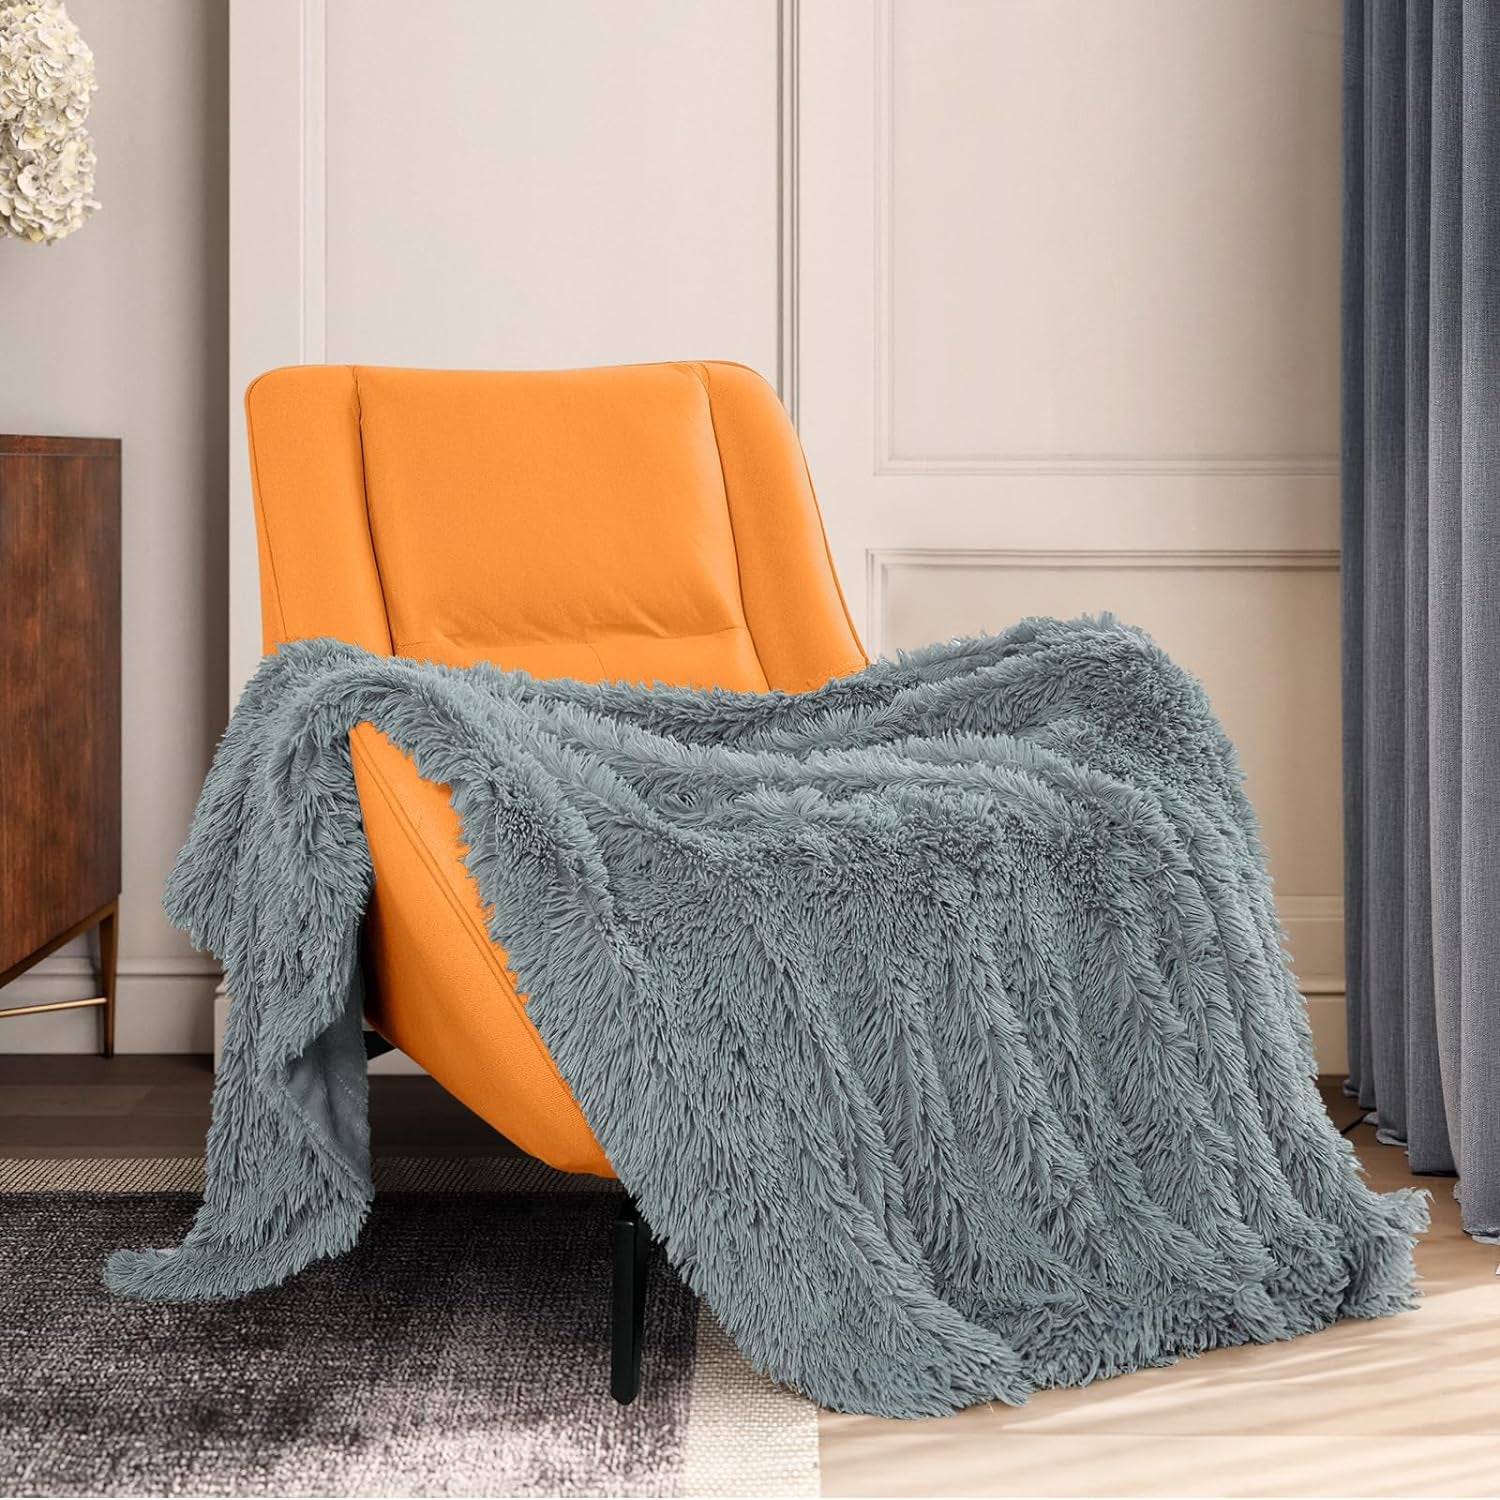 Extra Soft Fuzzy Faux Fur Throw Blanket 50"X60", Reversible Lightweight Fluffy Cozy Plush Comfy Microfiber Fleece Decorative Shaggy Blanket for Couch Sofa Bed, Blue Grey